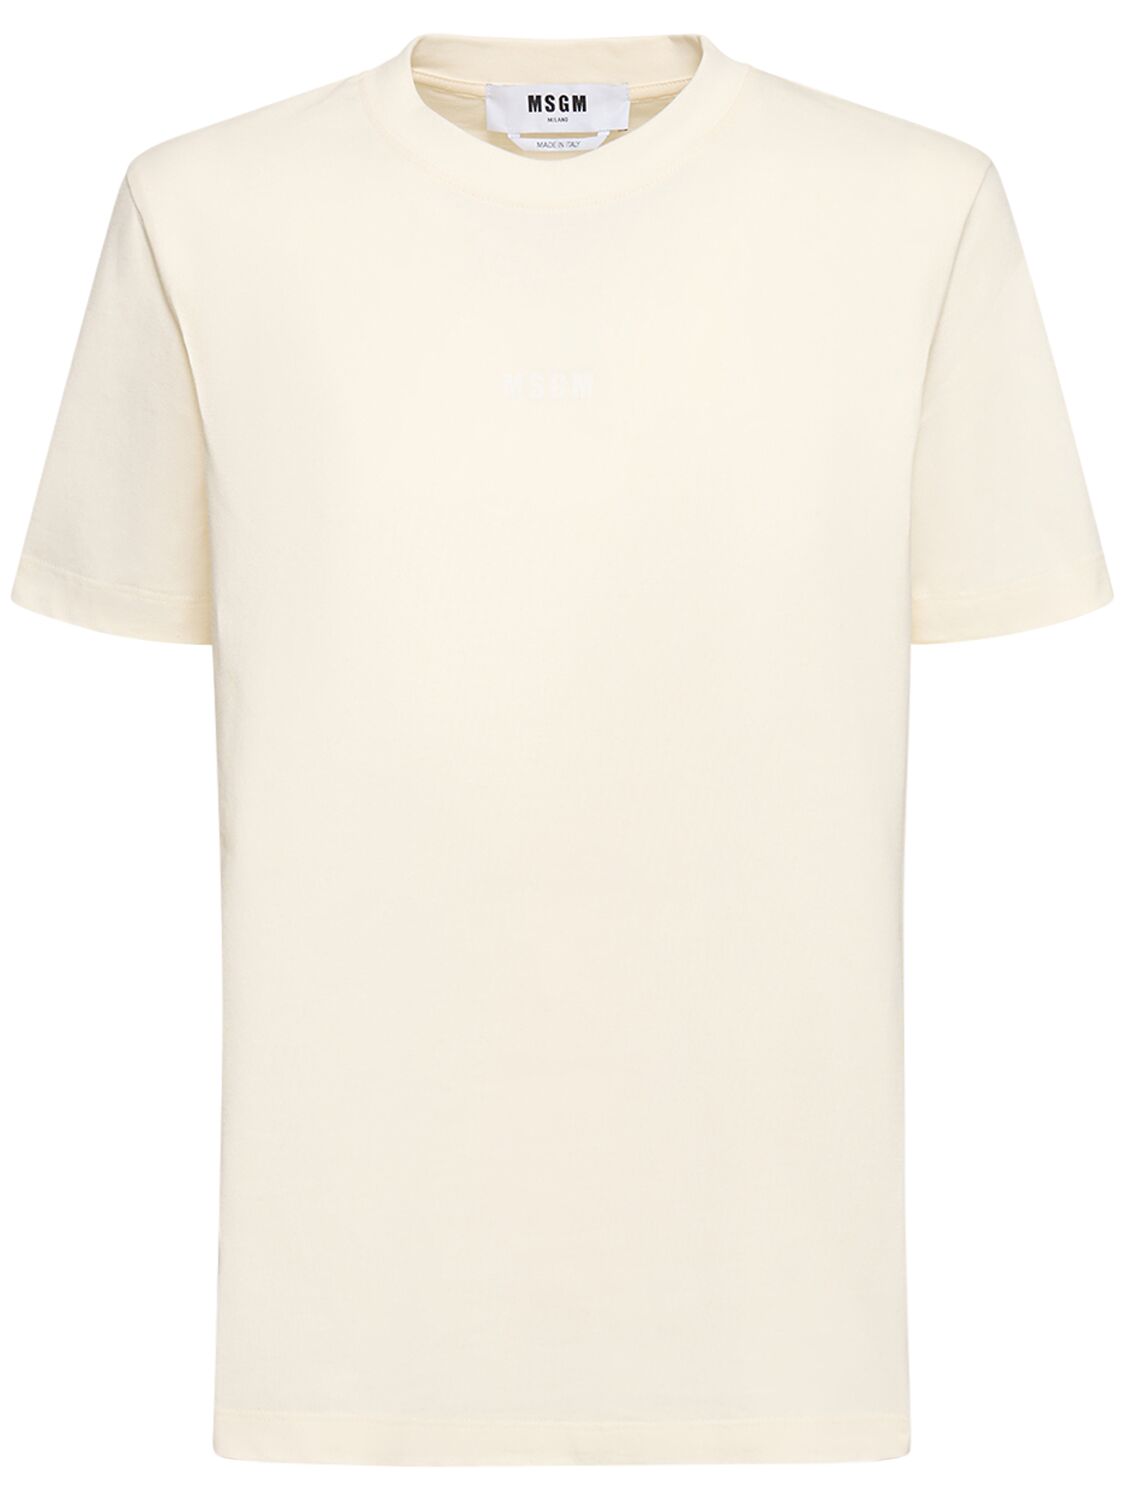 Msgm Logo Cotton T-shirt In Off White